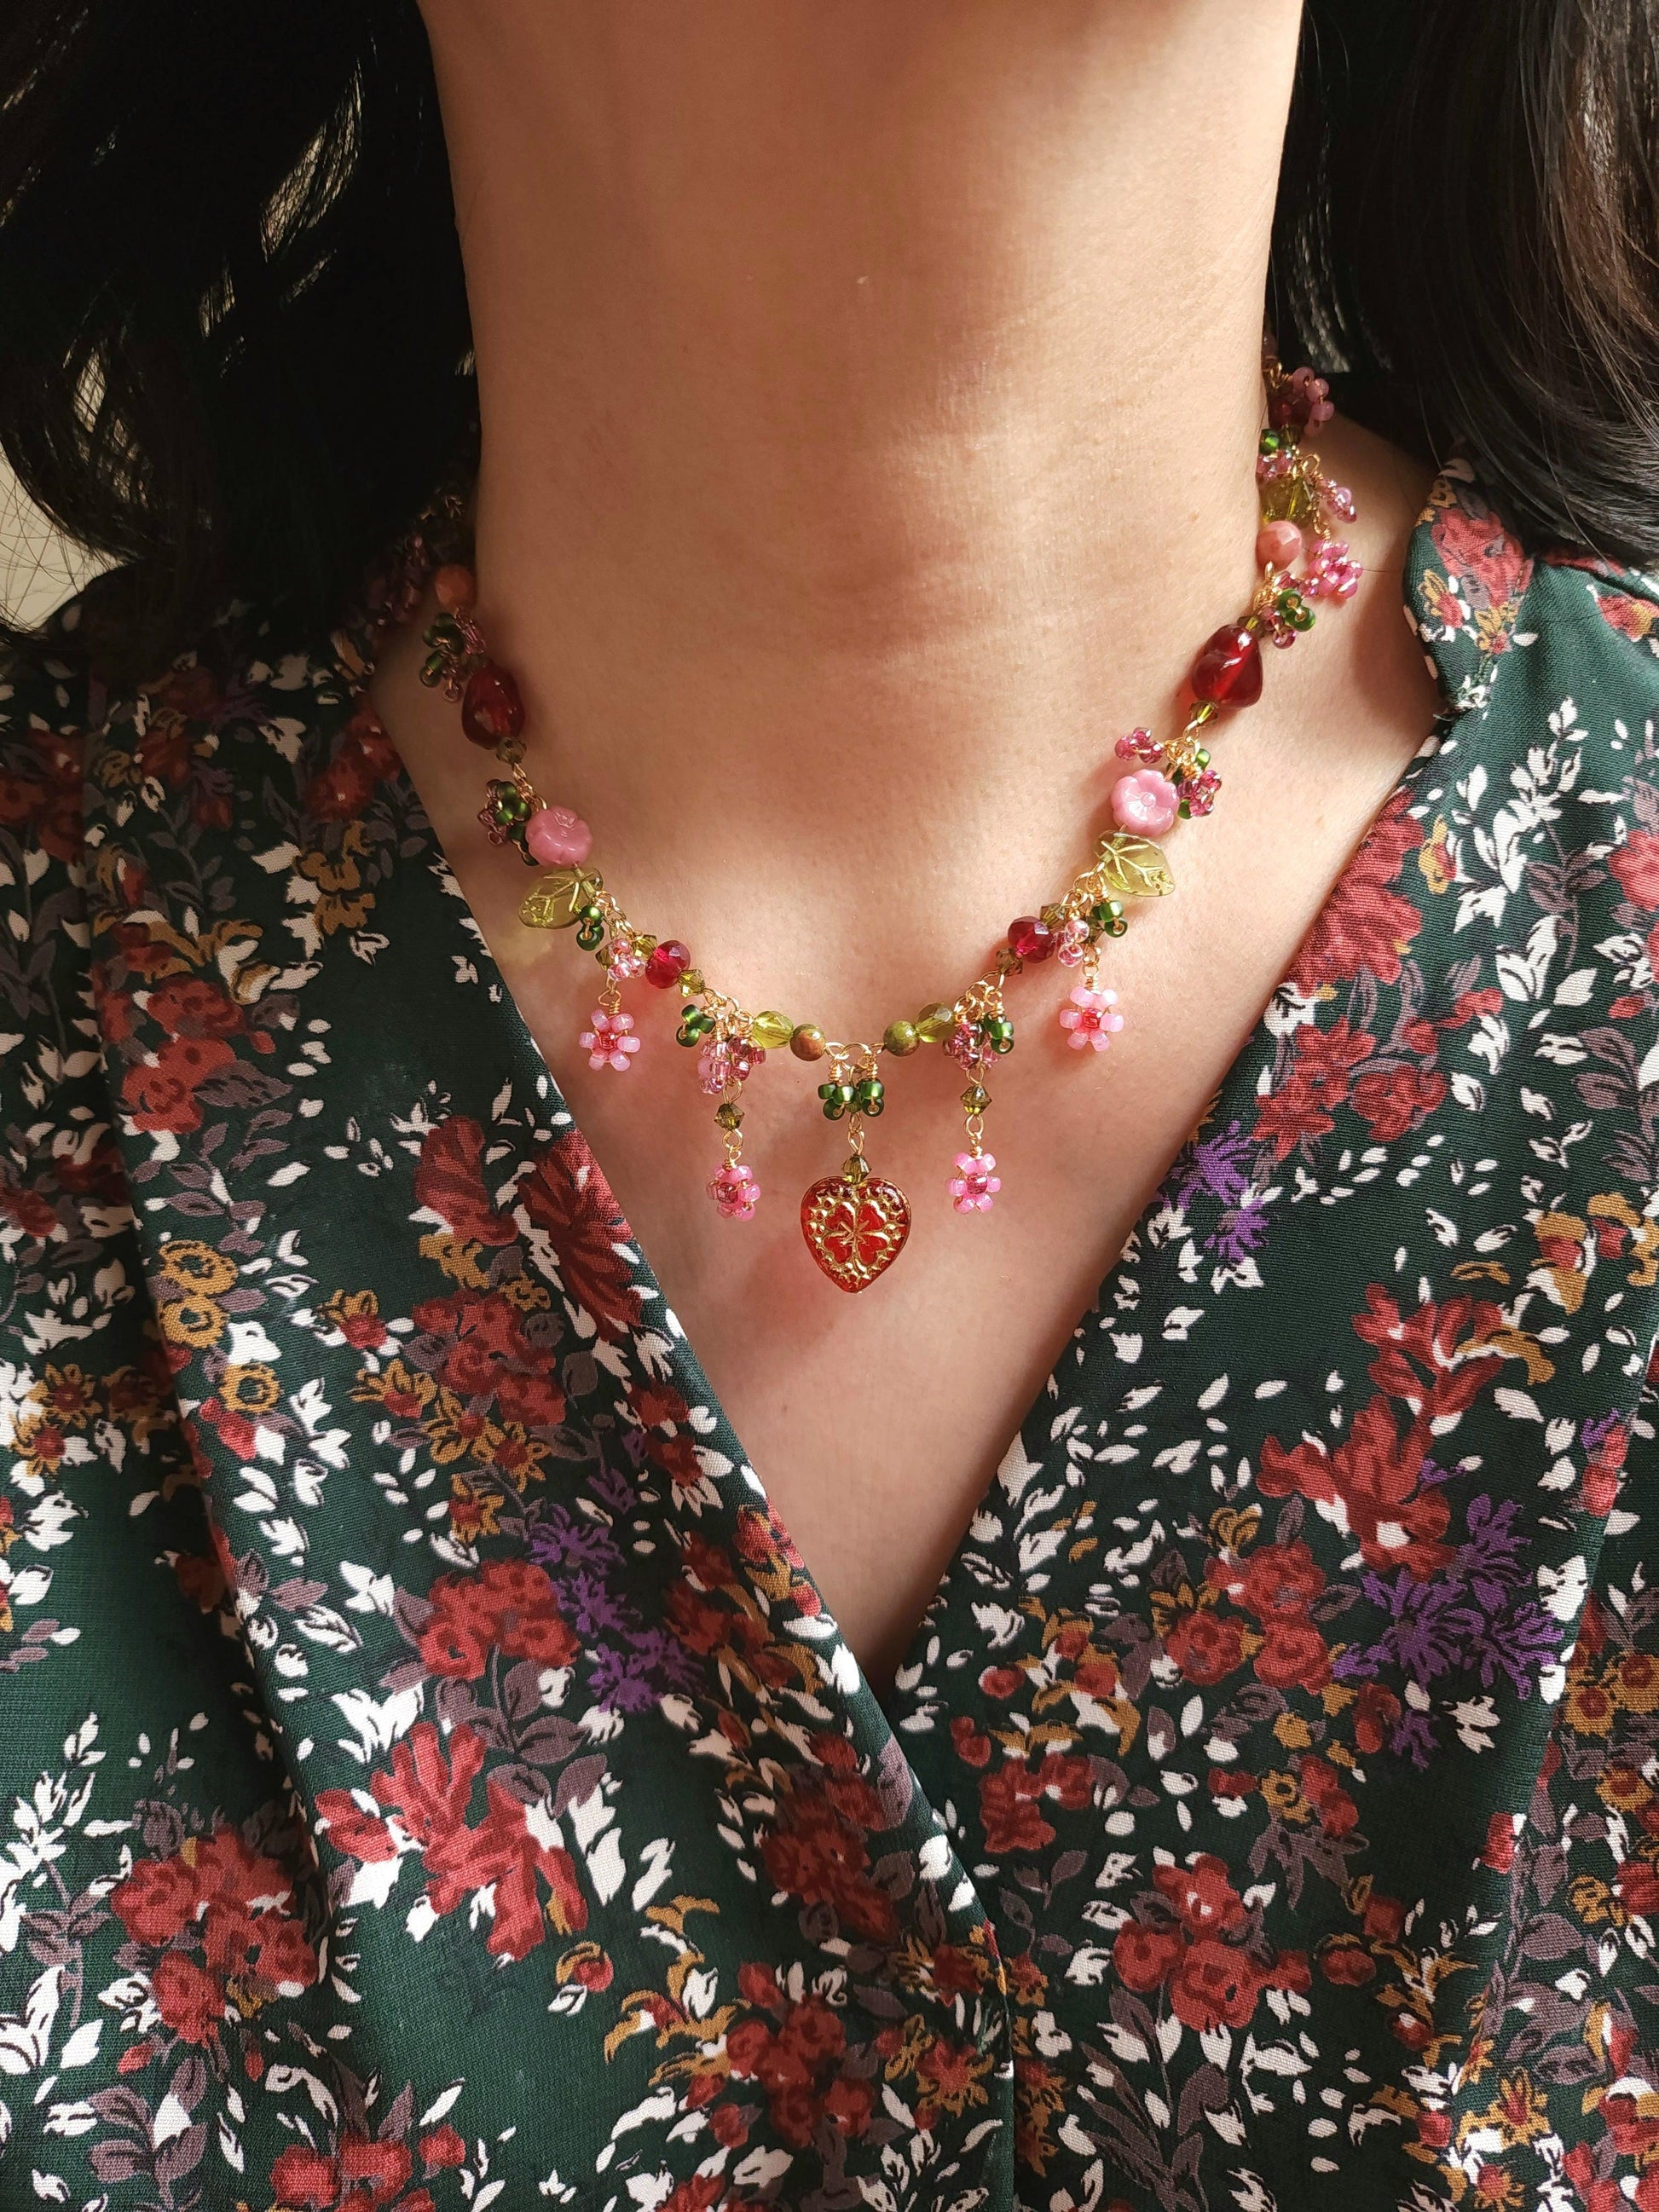 Amaryllis Heart Necklace - By Cocoyu